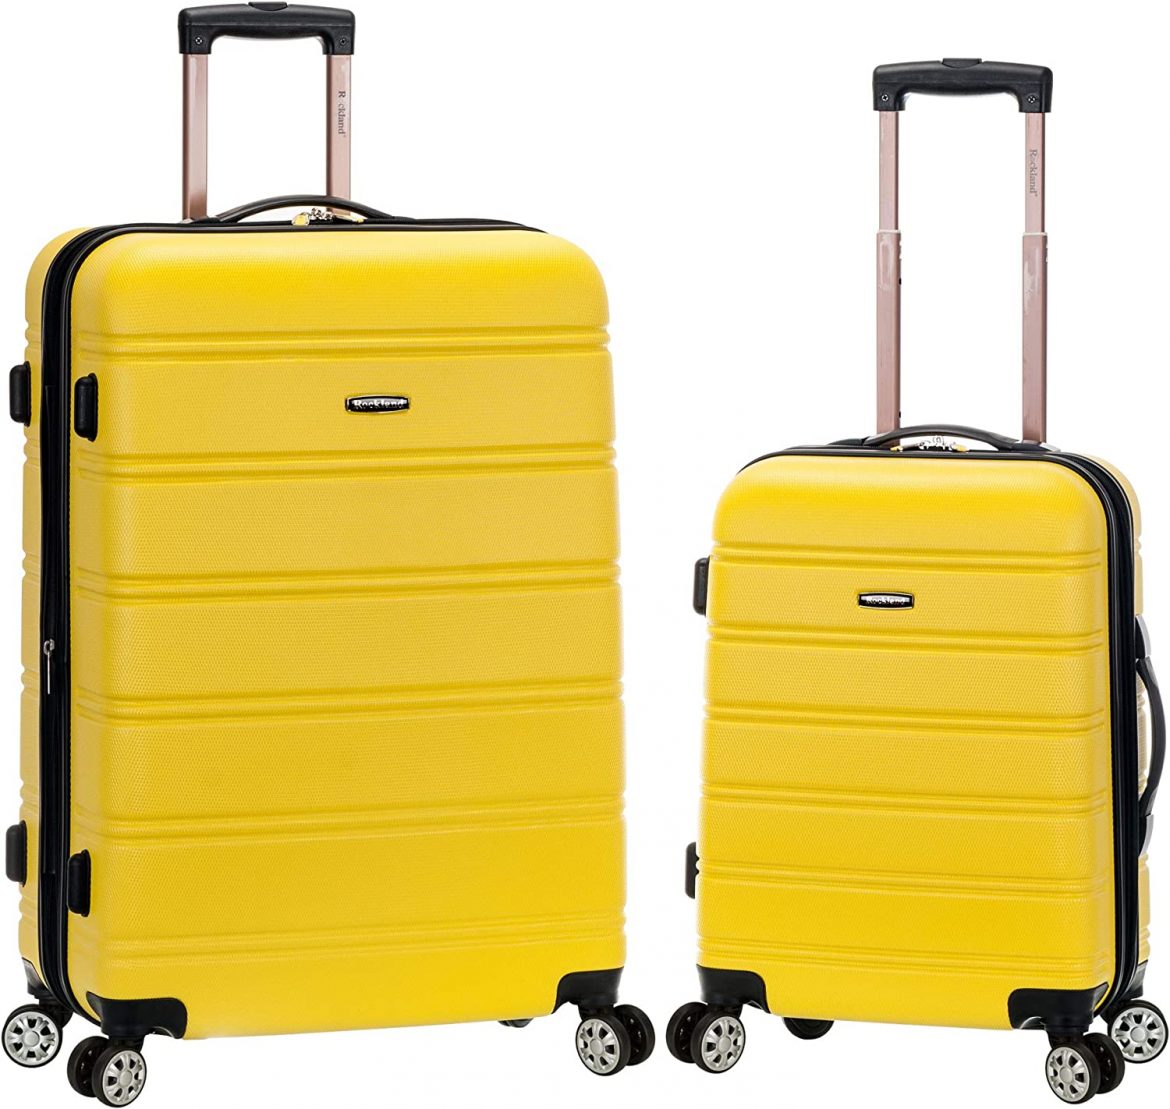 Rockland Unisex Adults Hardside Expandable Spinner Luggage Set, Yellow, 20″/28″, Pack of 2